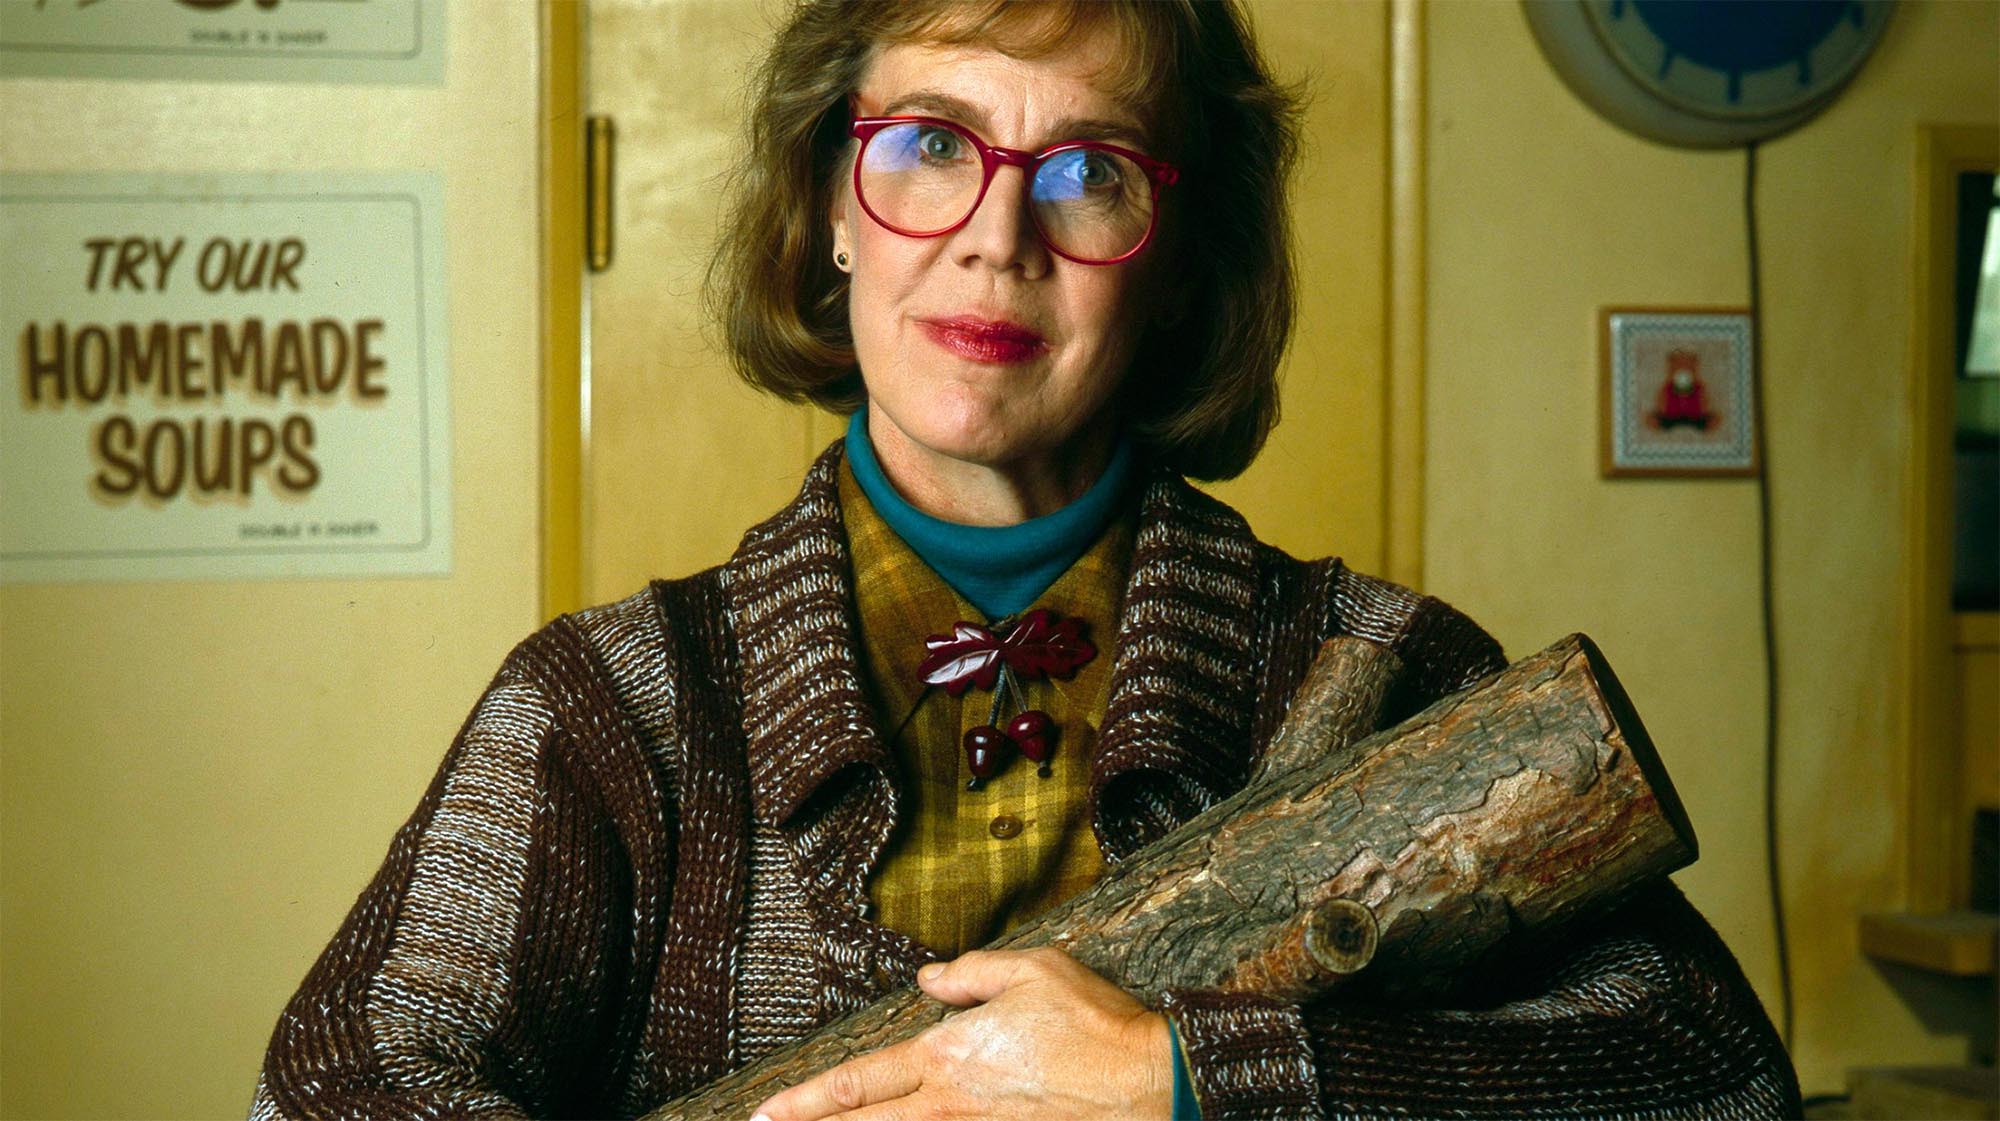 With 'I Know Catherine, The Log Lady', audiences may finally get to know a little more about the woman Lynch called “solid gold”, Catherine E. Coulson.